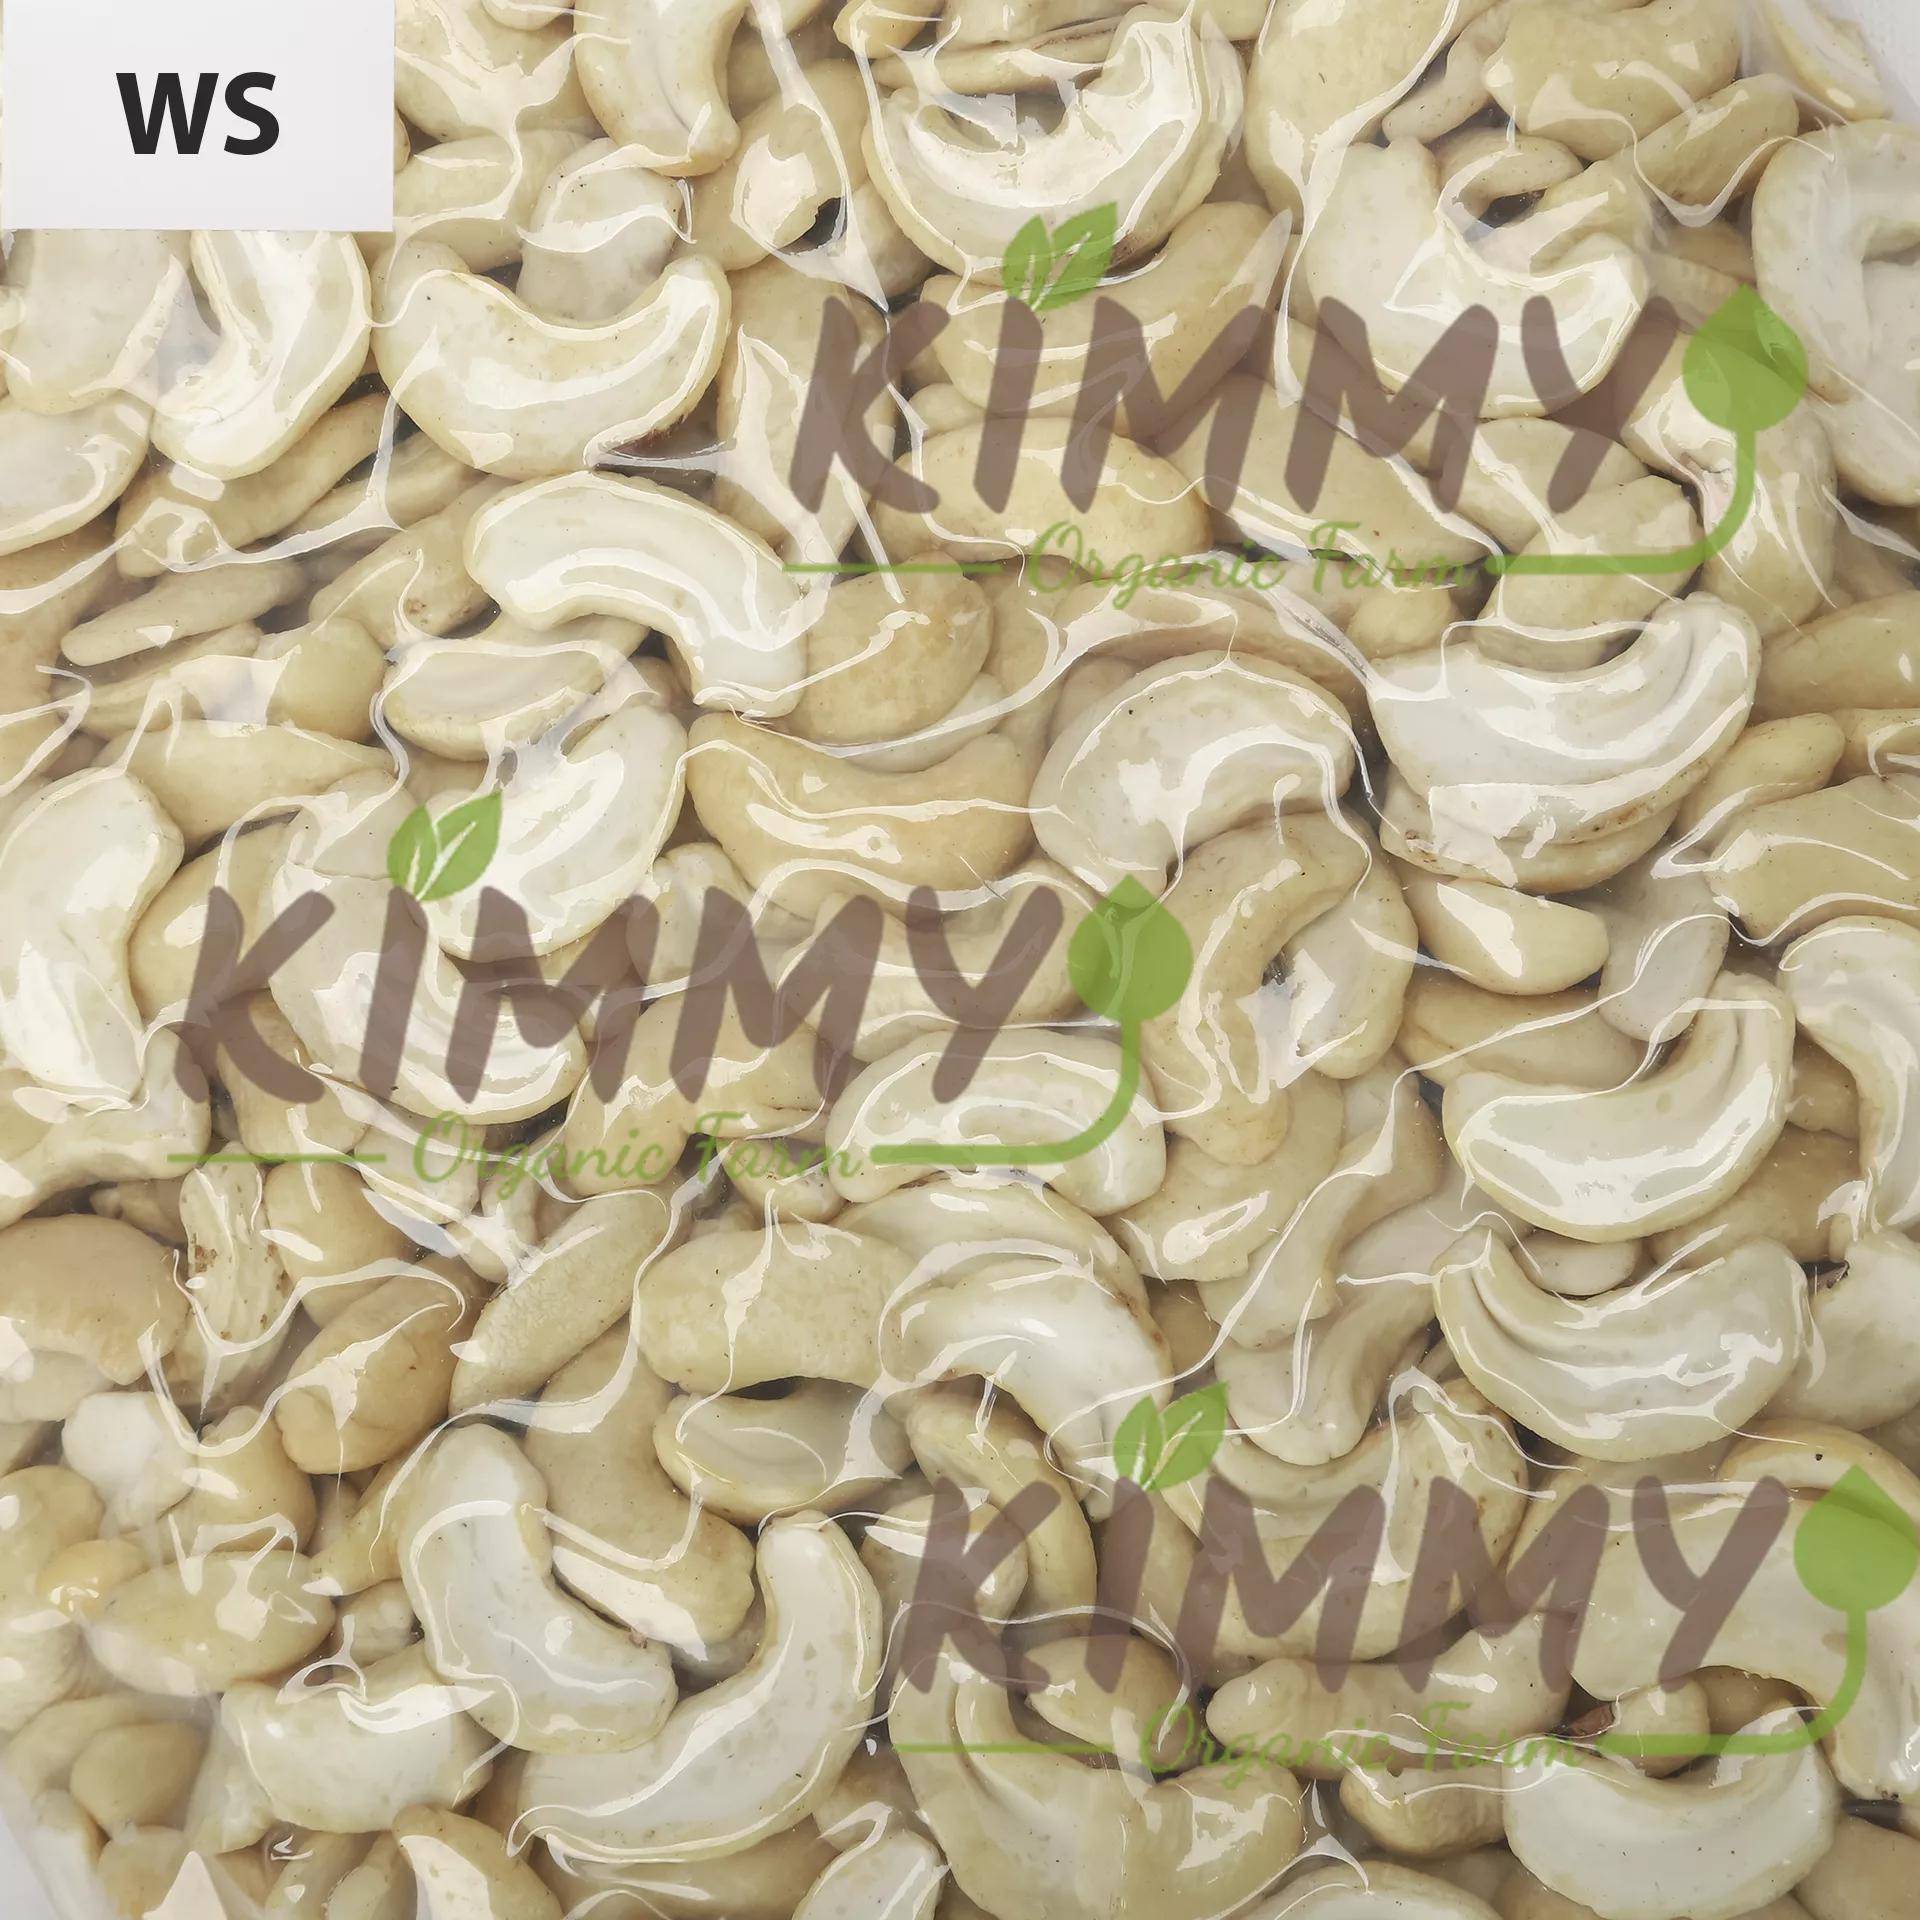 WS Cashew With 1st Quality – 1KG Packed in Vacuum Bags – Kimmy Farm Vietnam - 2